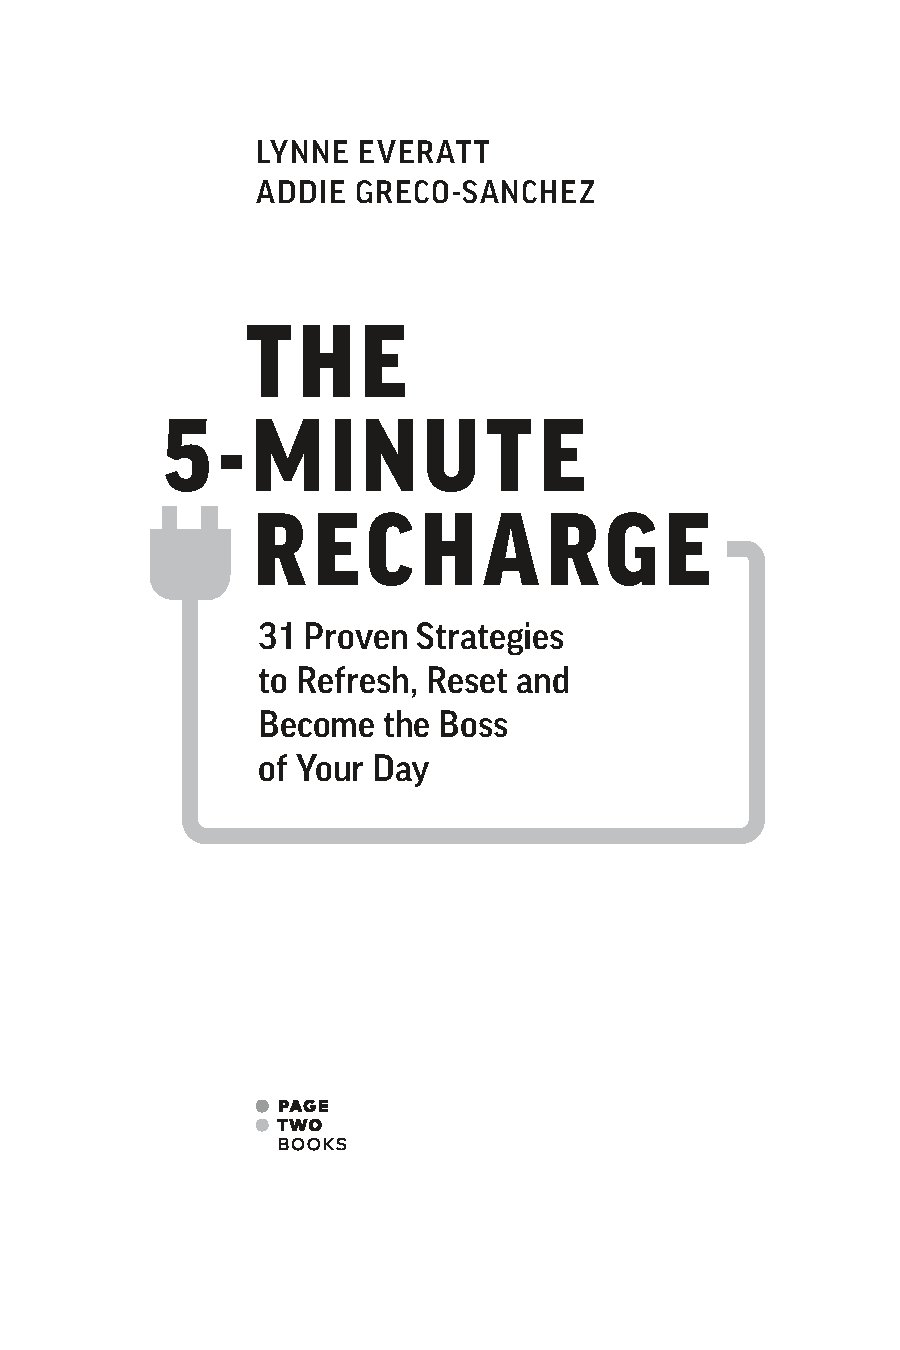 The 5-Minute Recharge